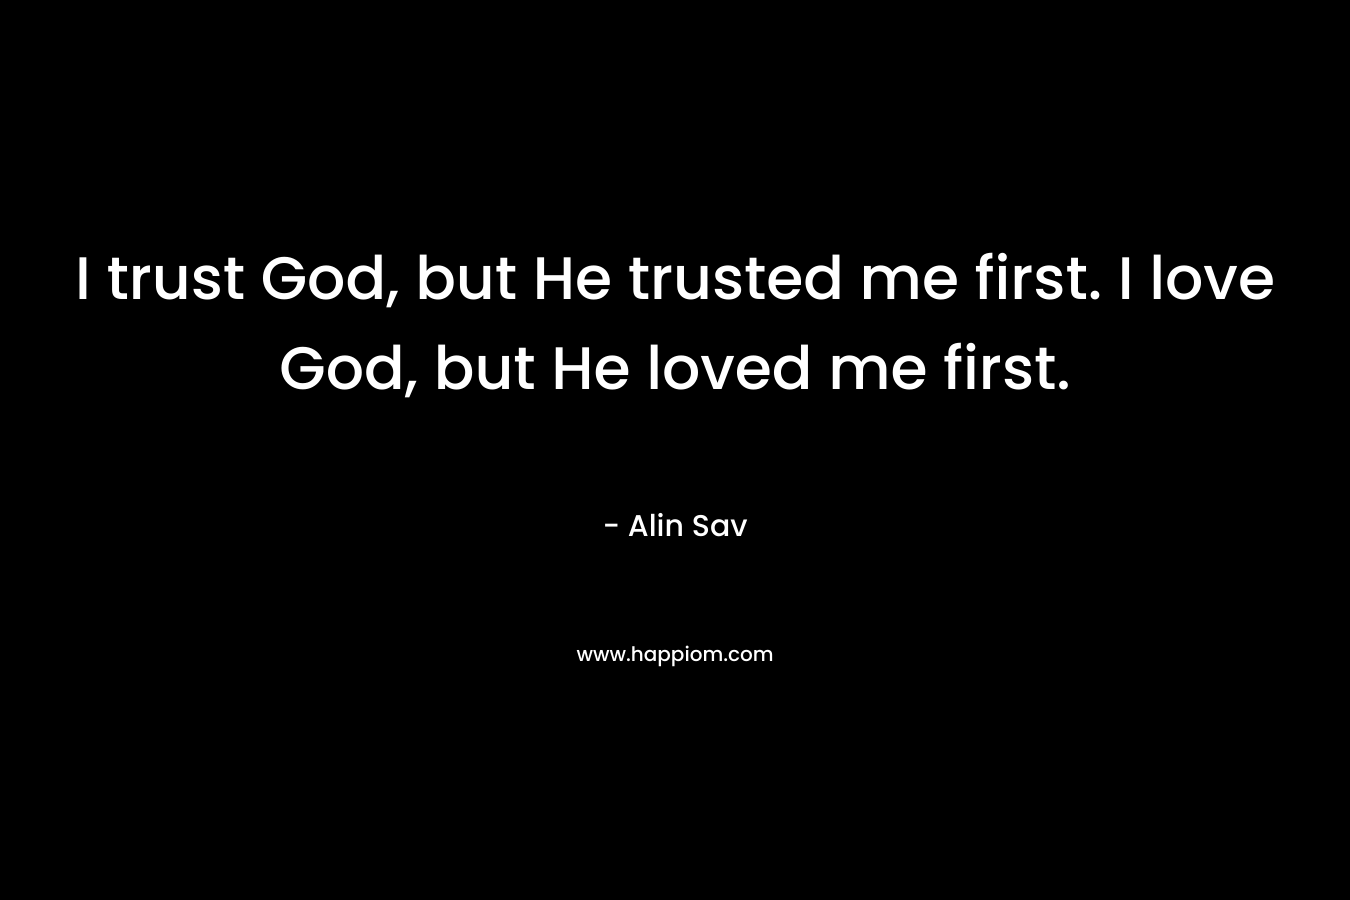 I trust God, but He trusted me first. I love God, but He loved me first.